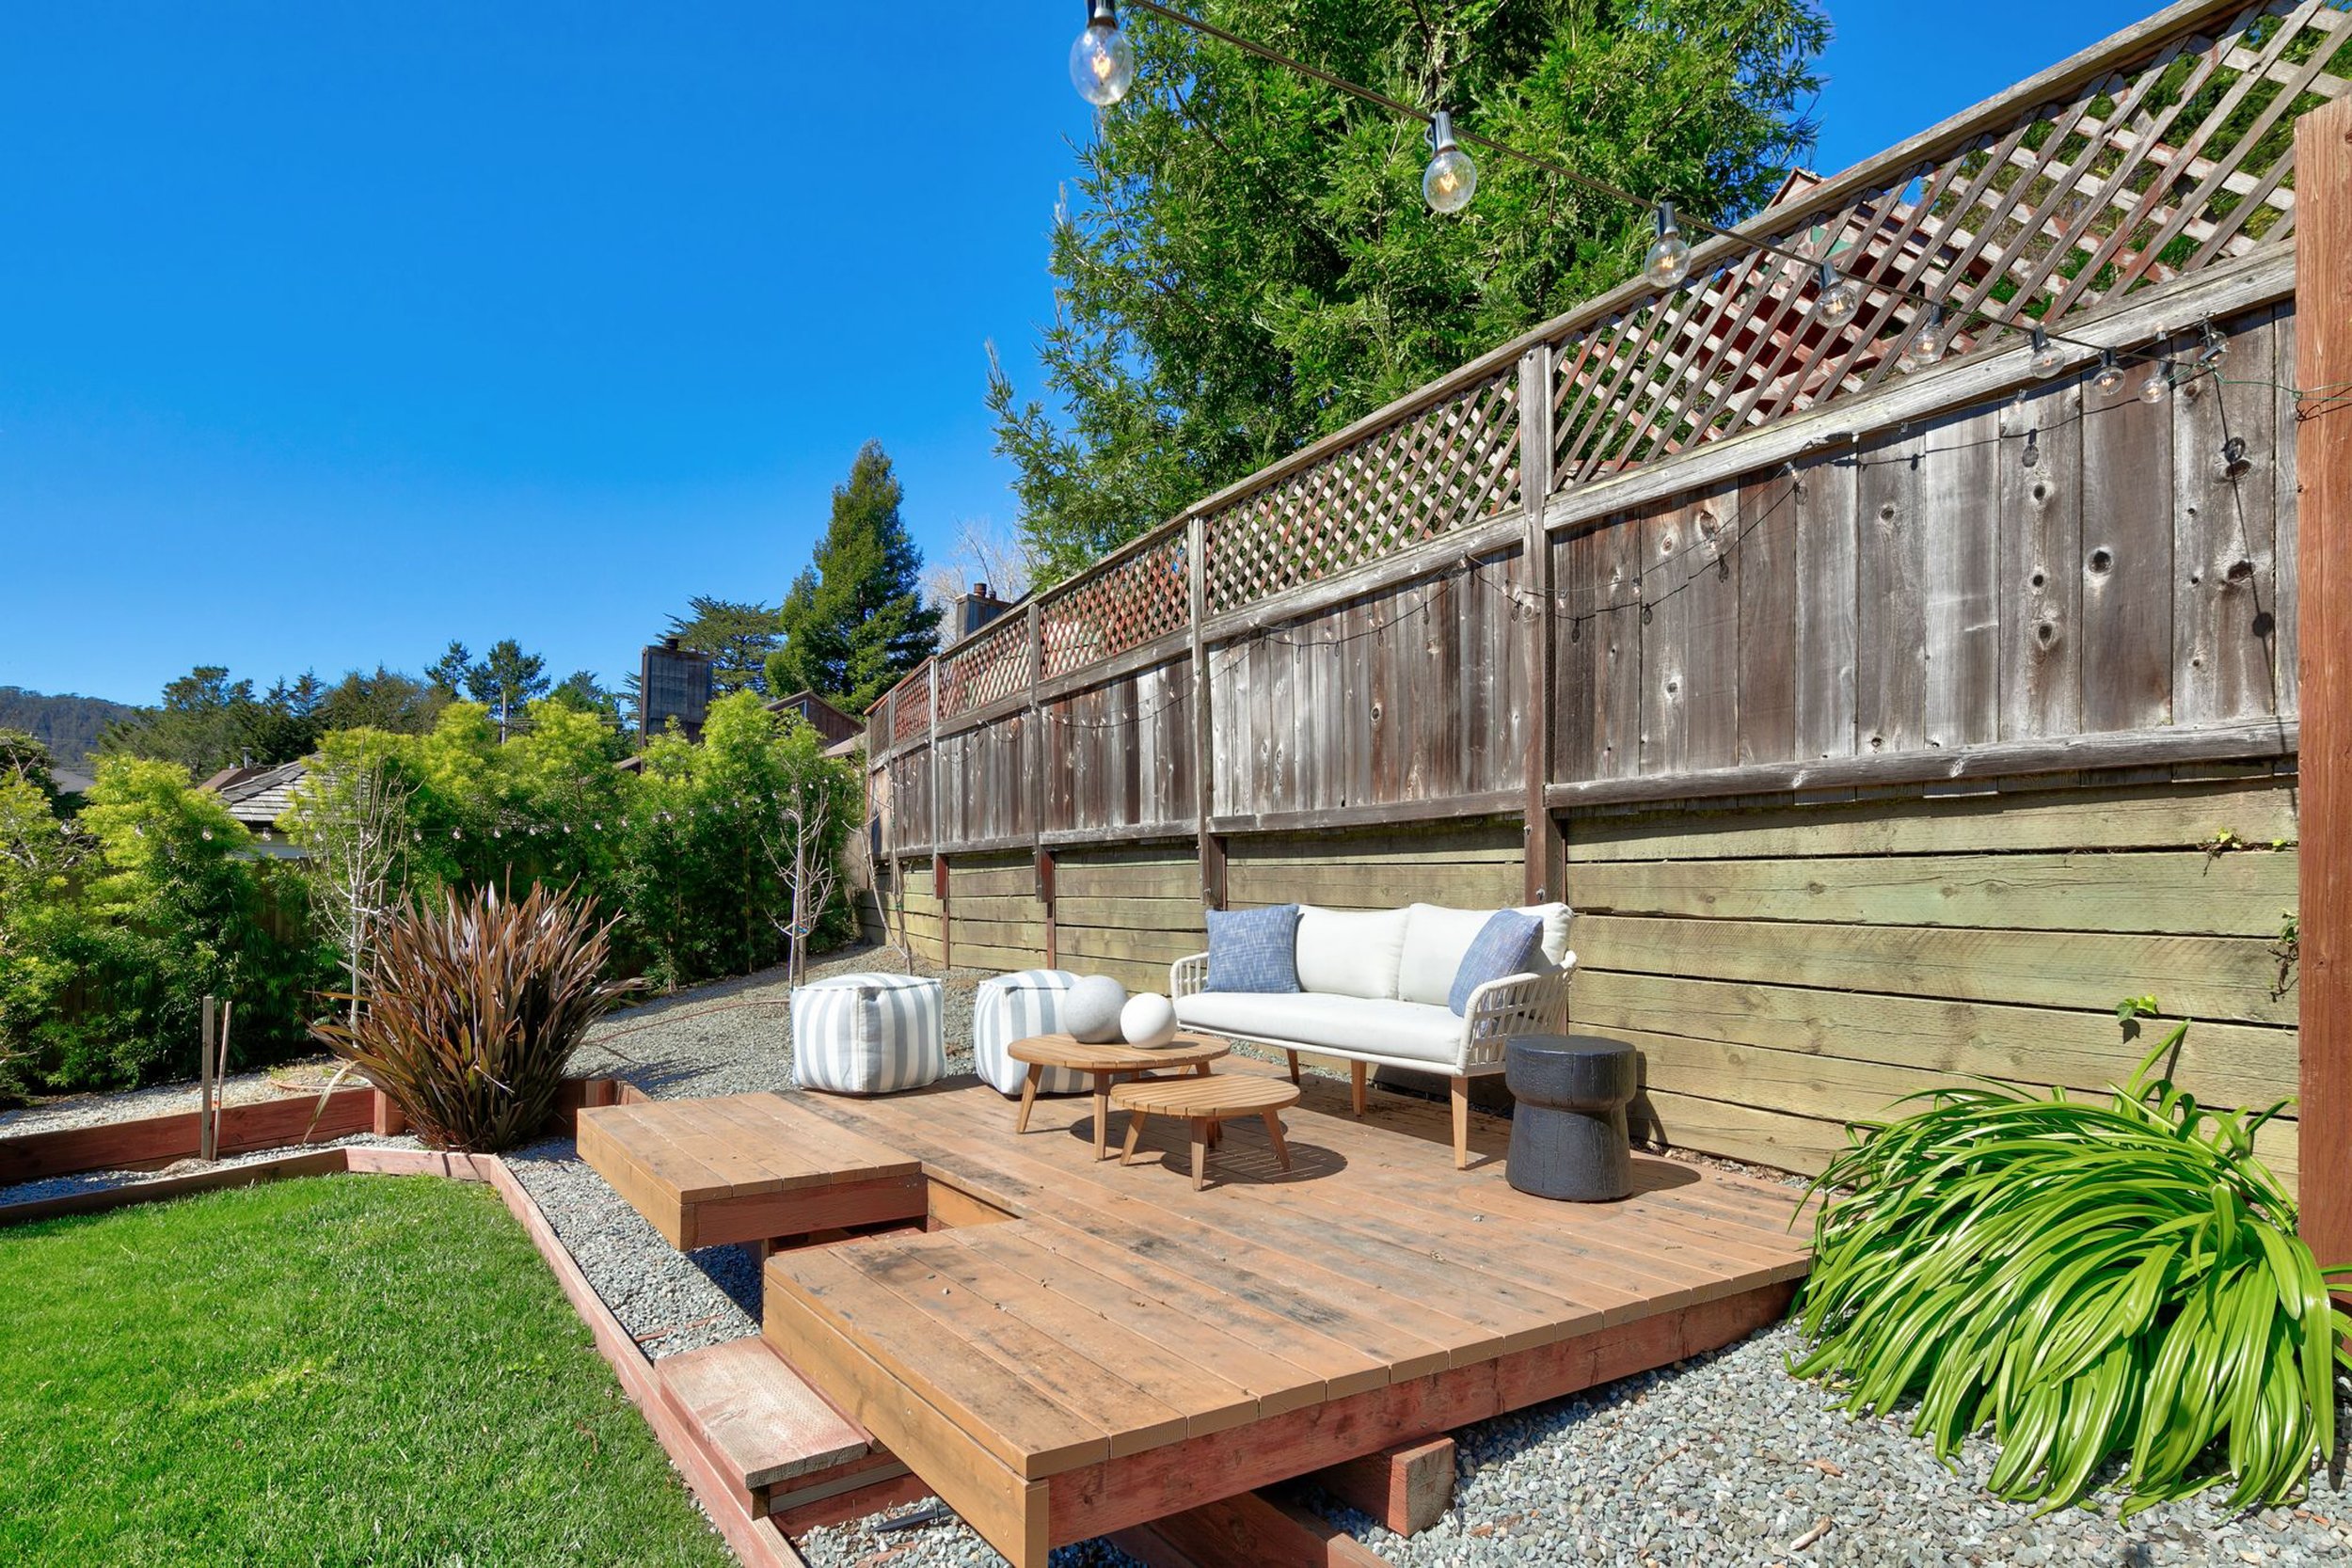 368 Shoreline Highway, Mill Valley listed by Mill Valley Realtor Allie Fornesi at Own Marin-31.jpg